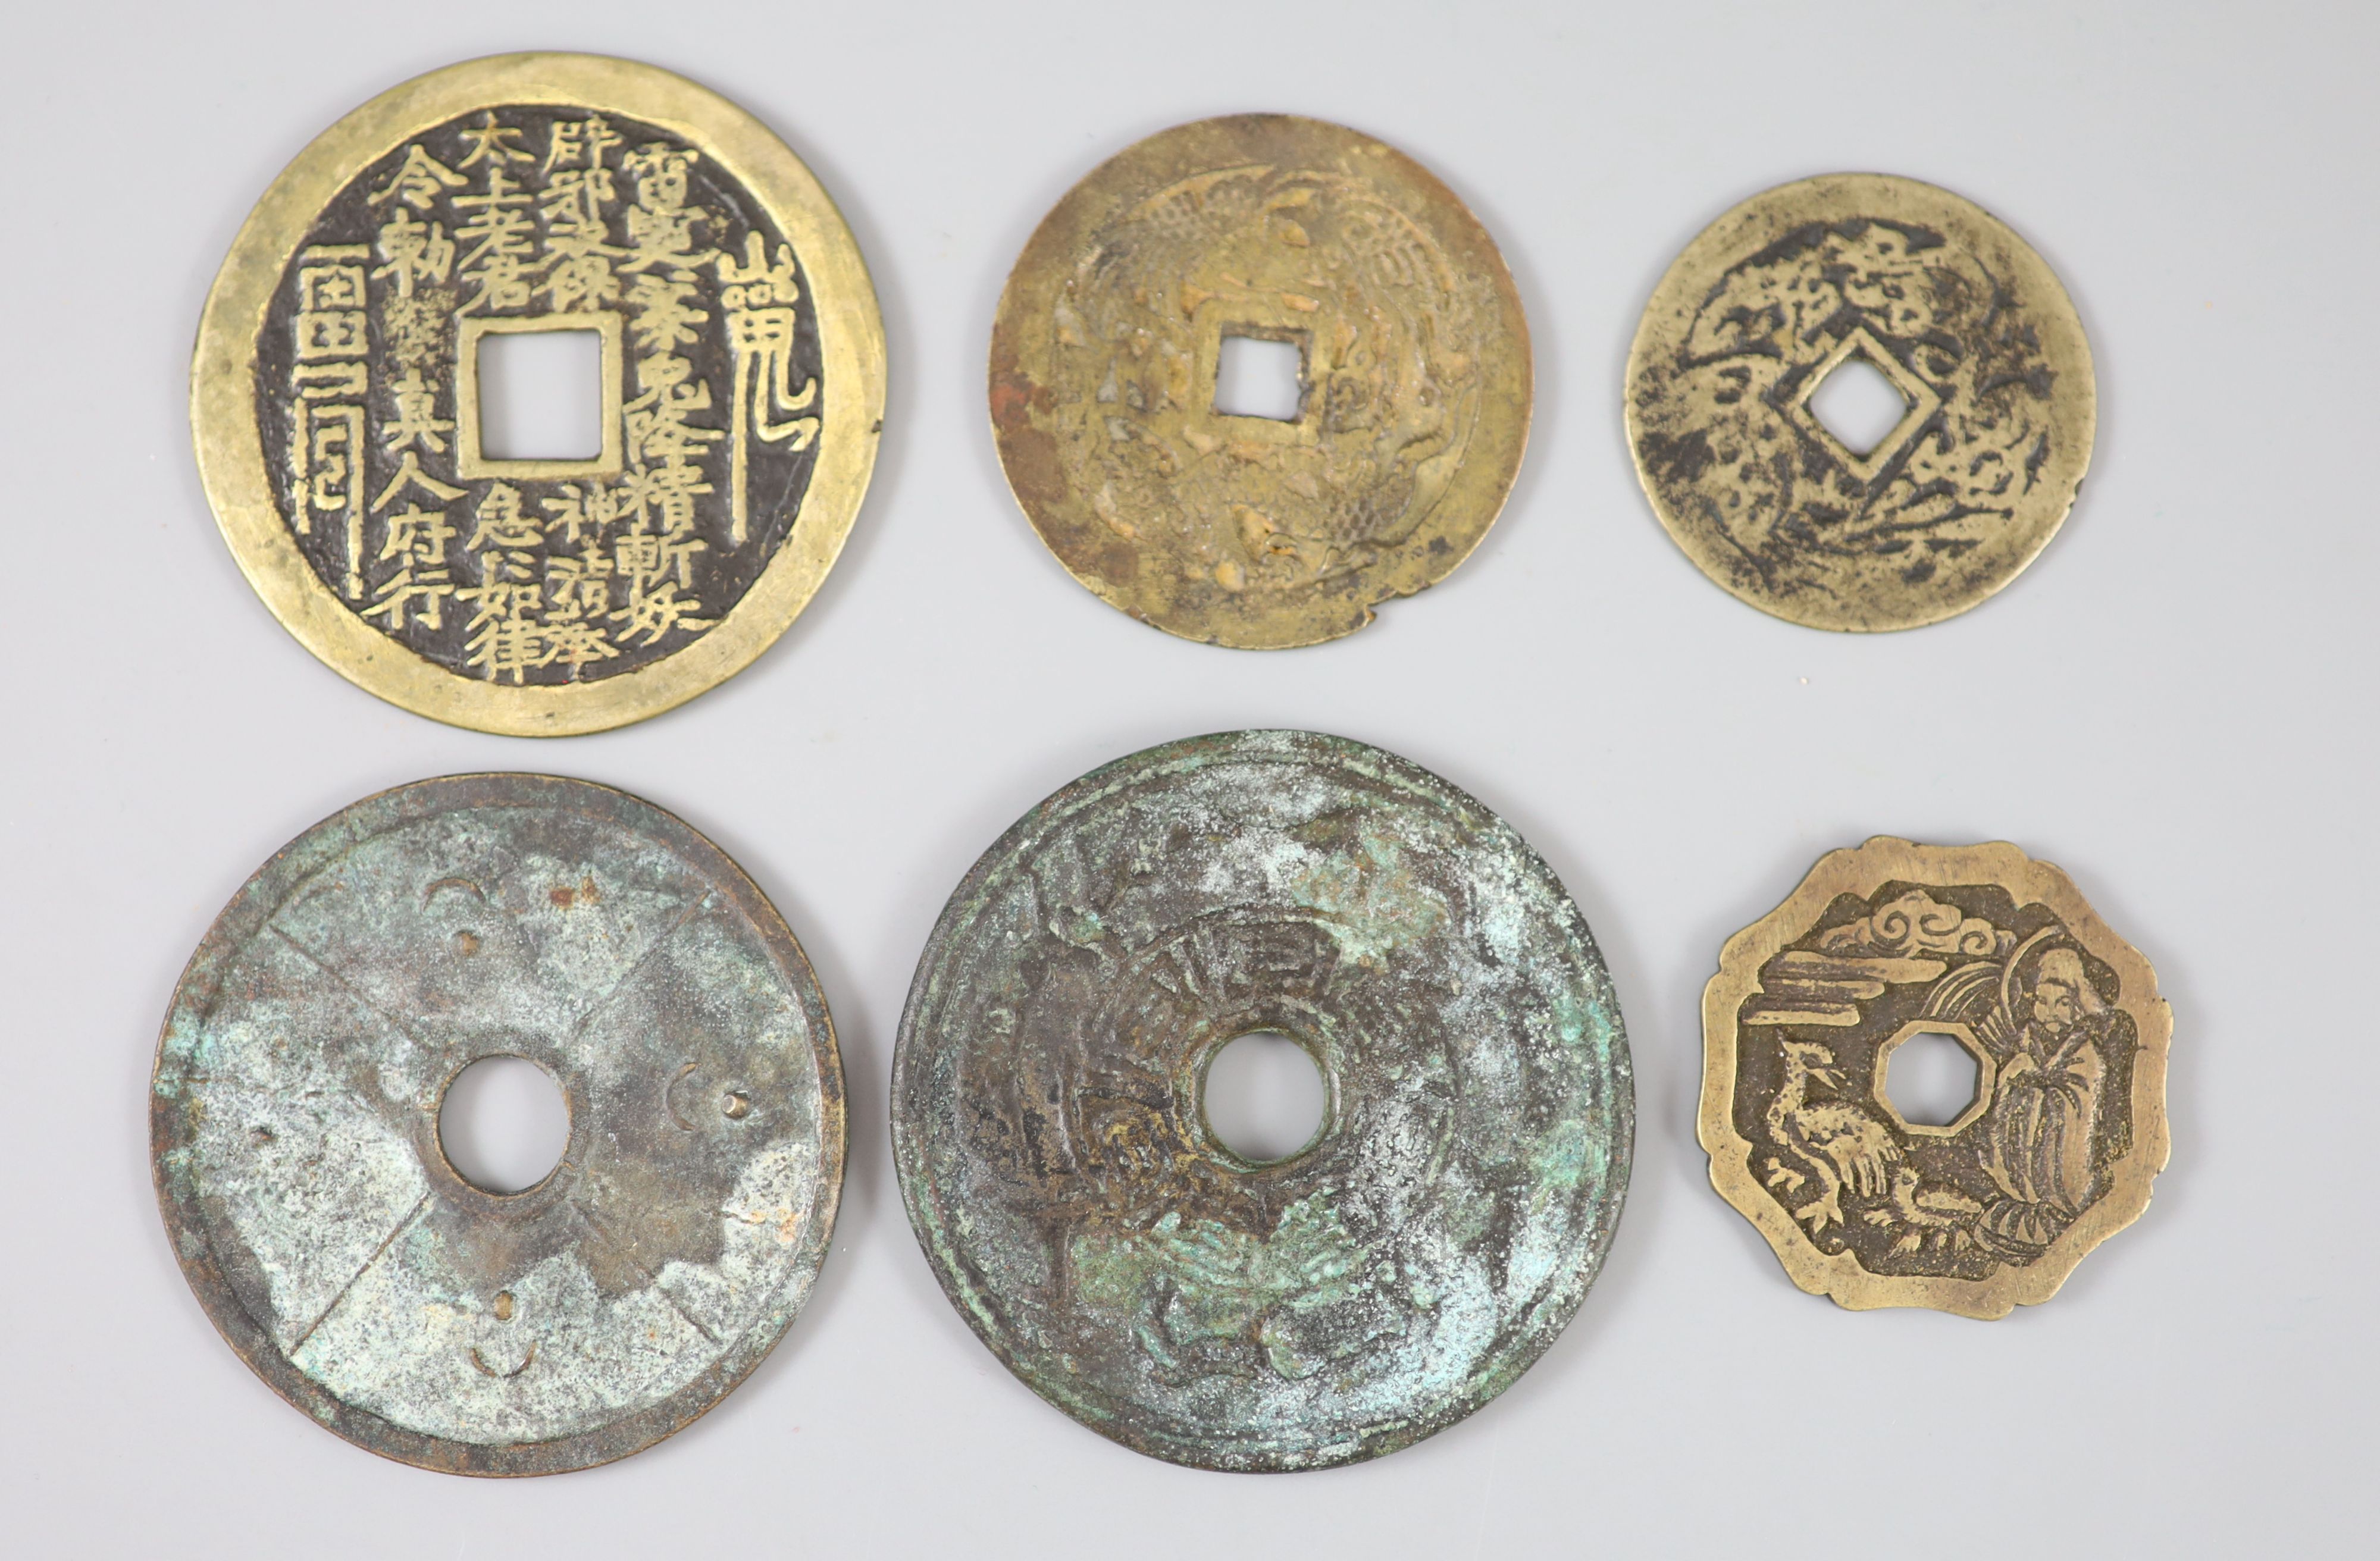 China, 6 bronze charms or amulets, Qing-Republic dynasty,